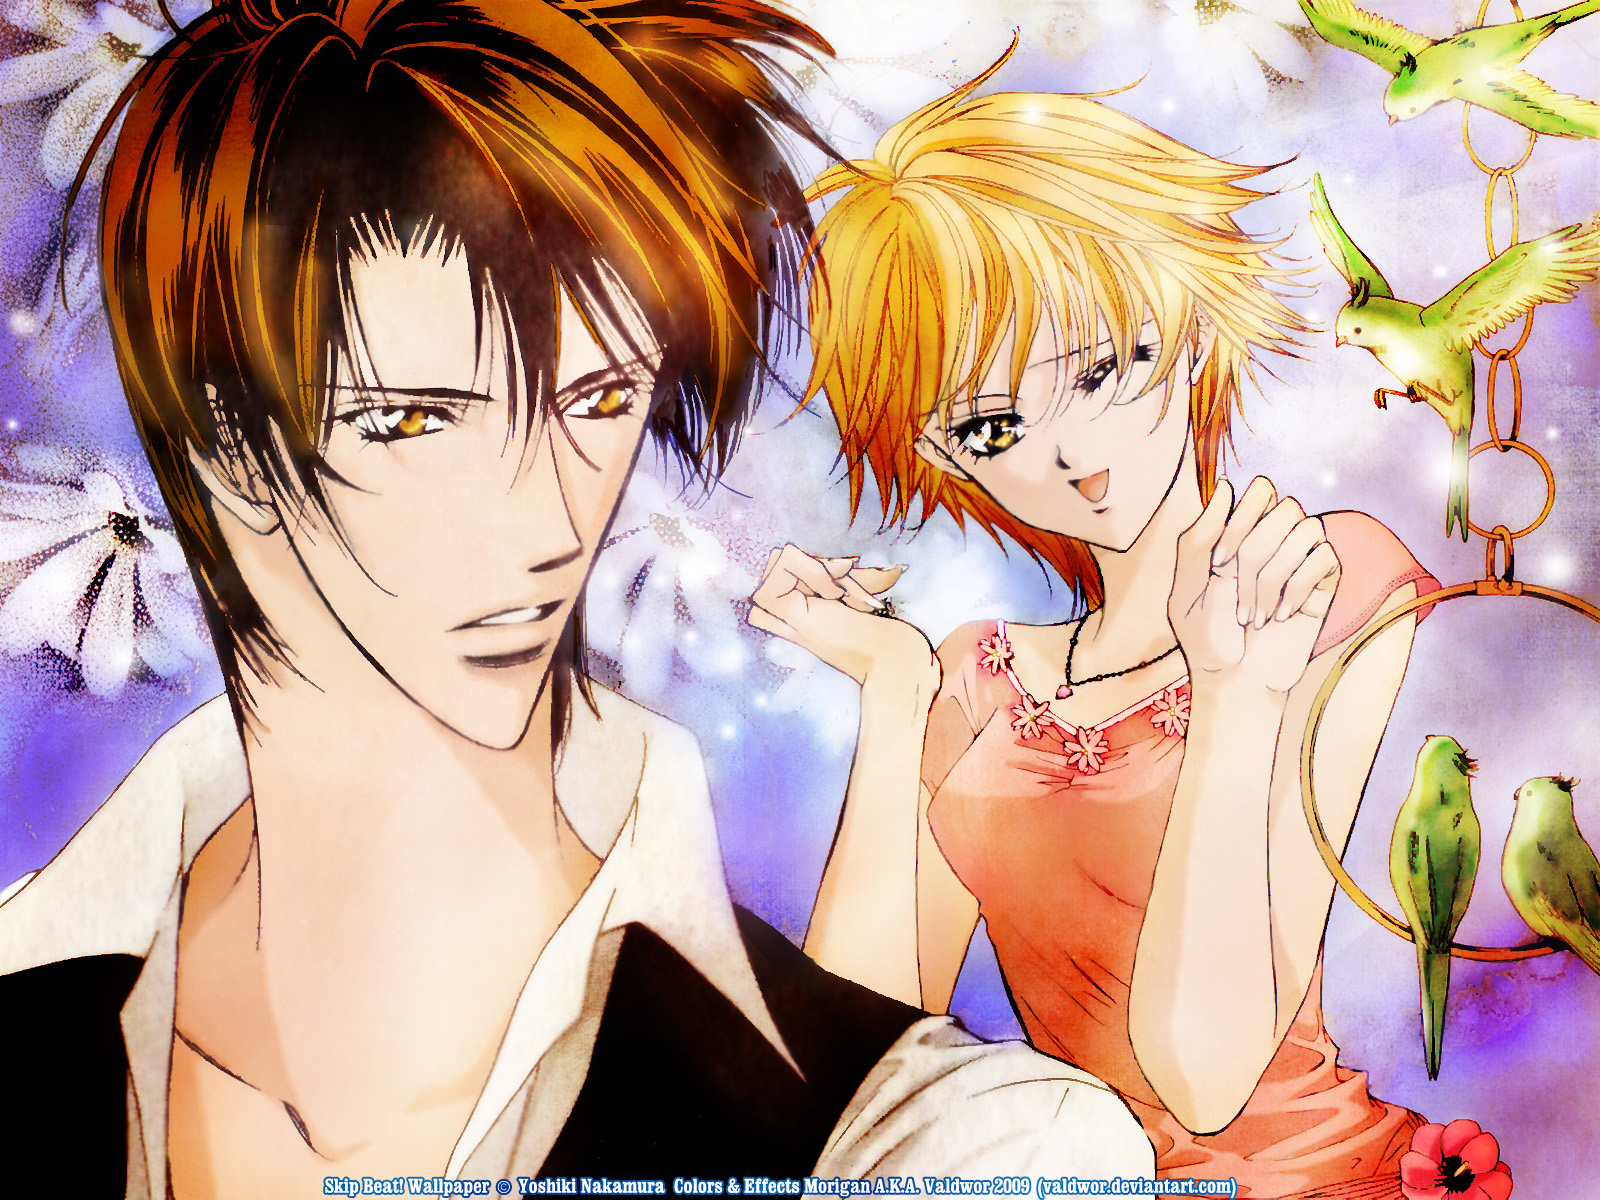 ♥ ♫ Anime Y Chicas‼♥ Wallpapers De Skip Beat.